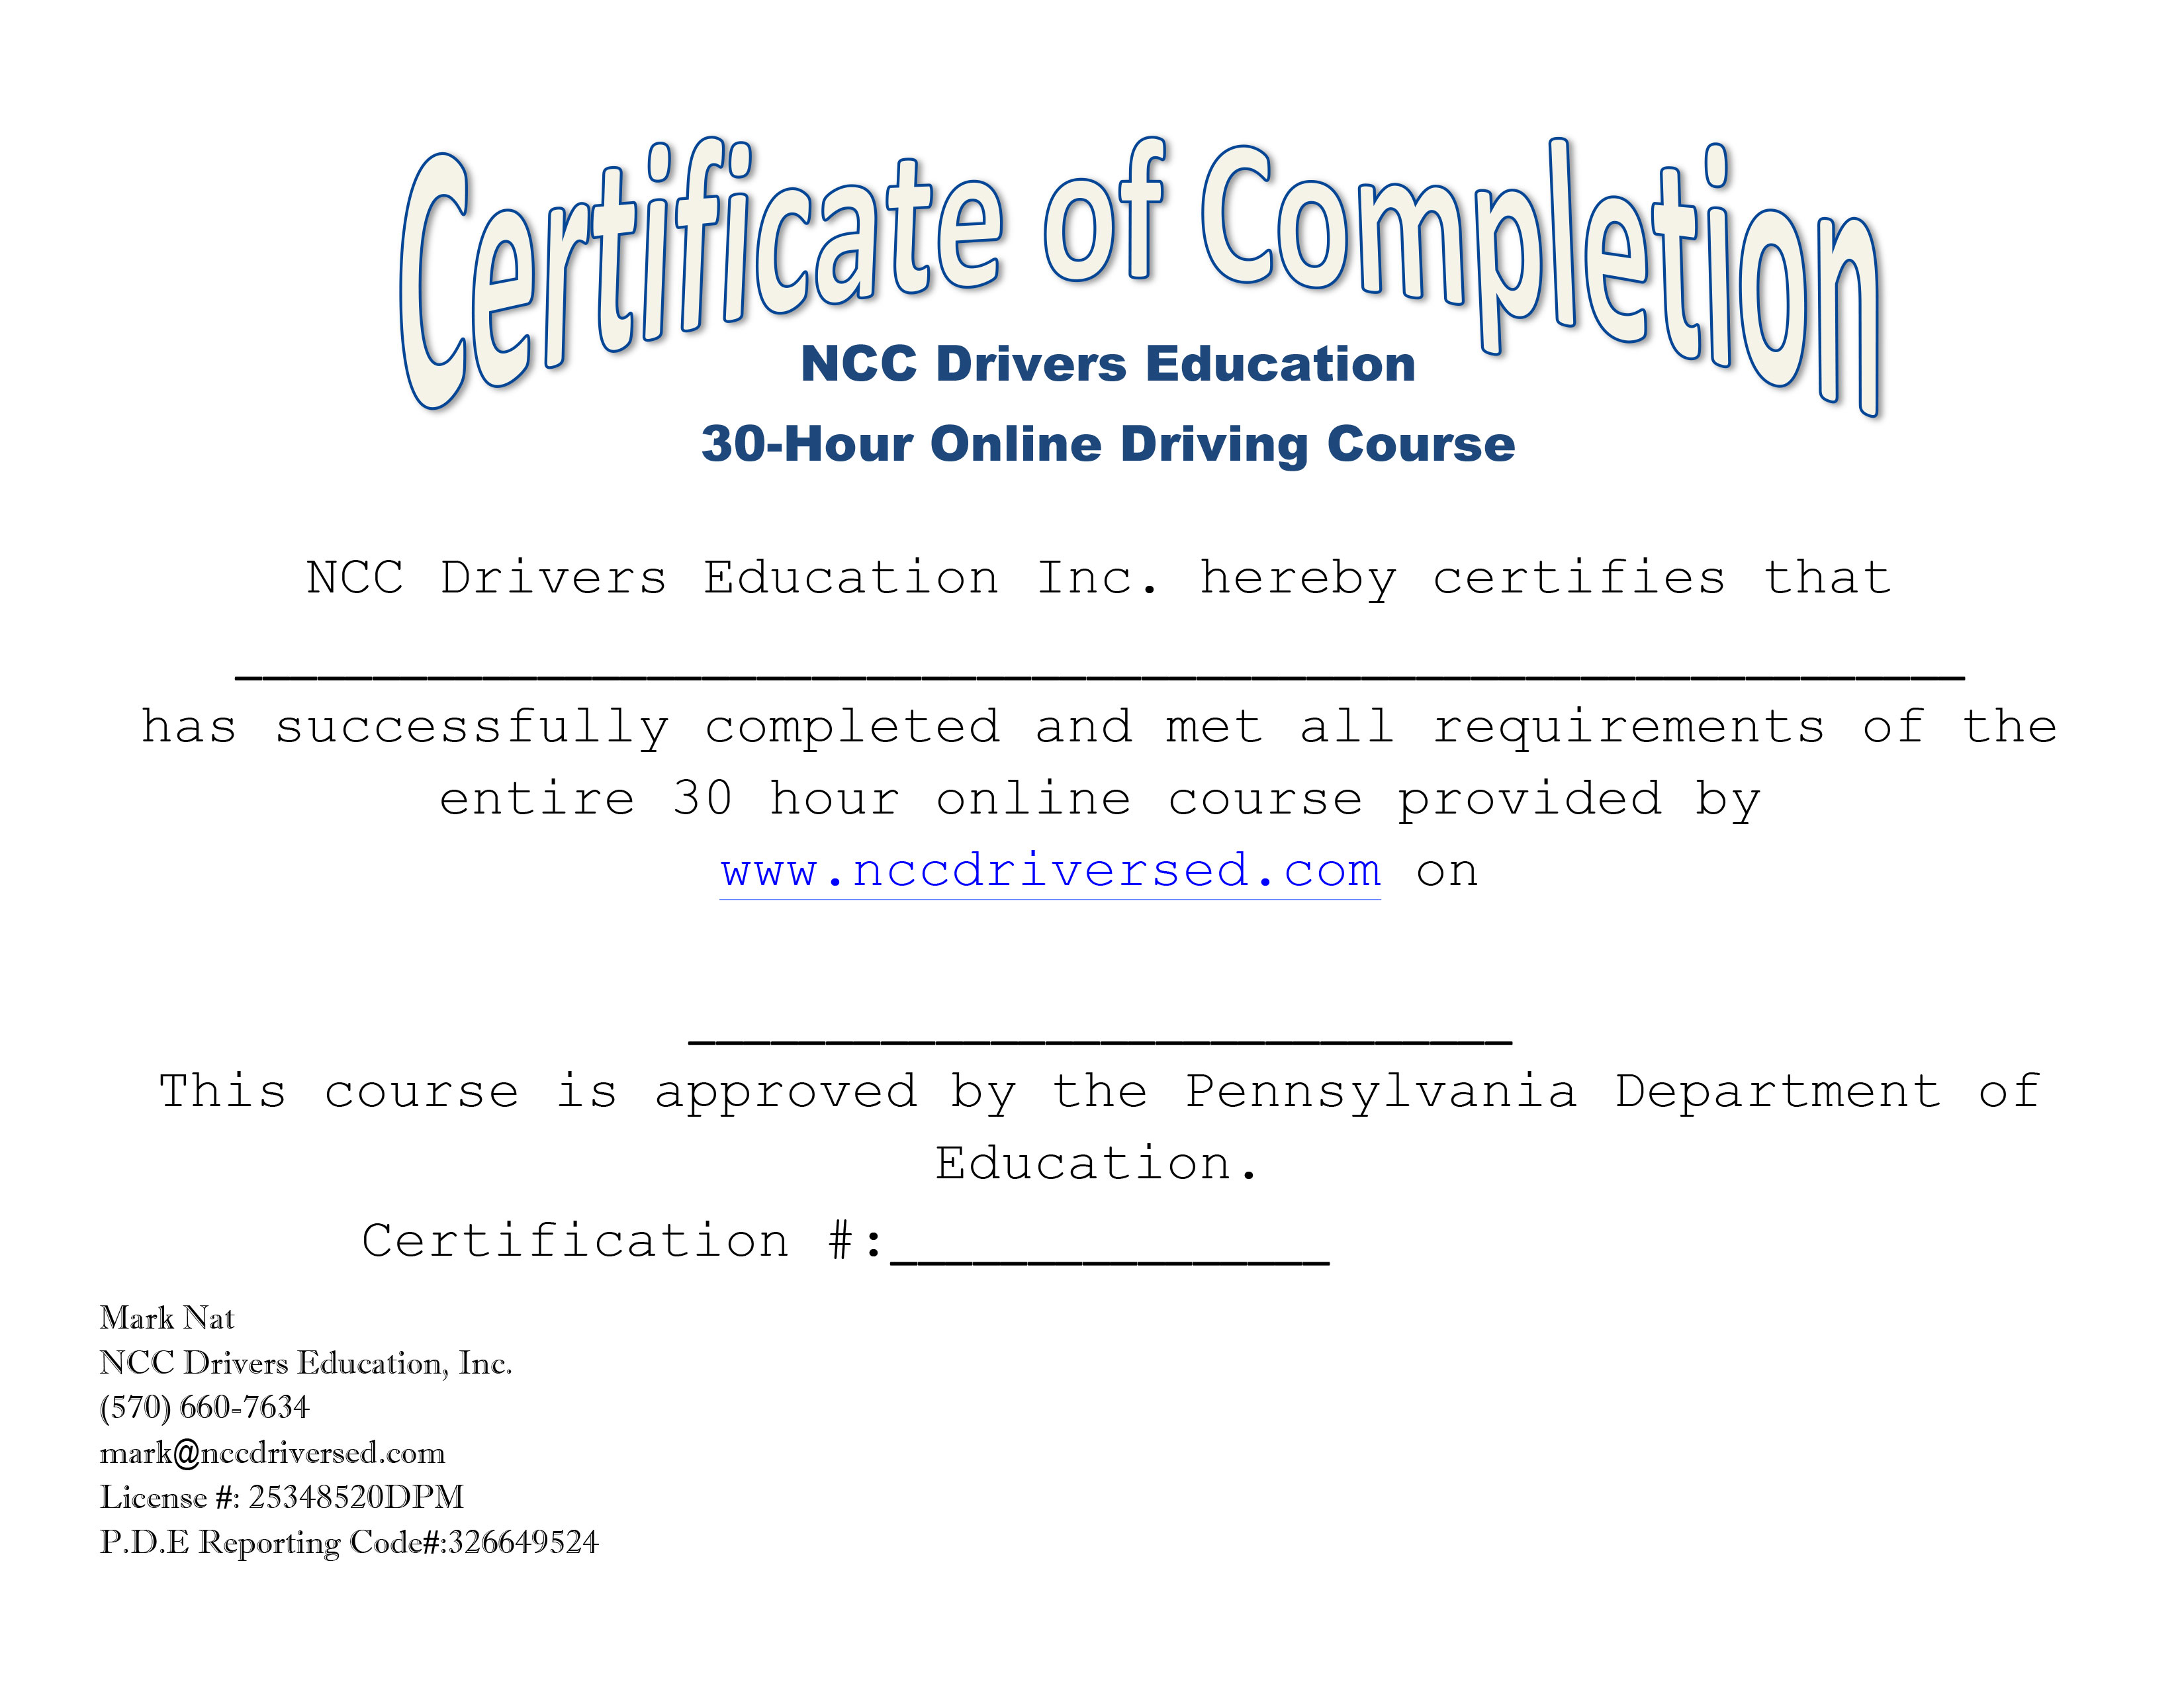 The Road To Certification: Achieving Your Drivers Training Certificate